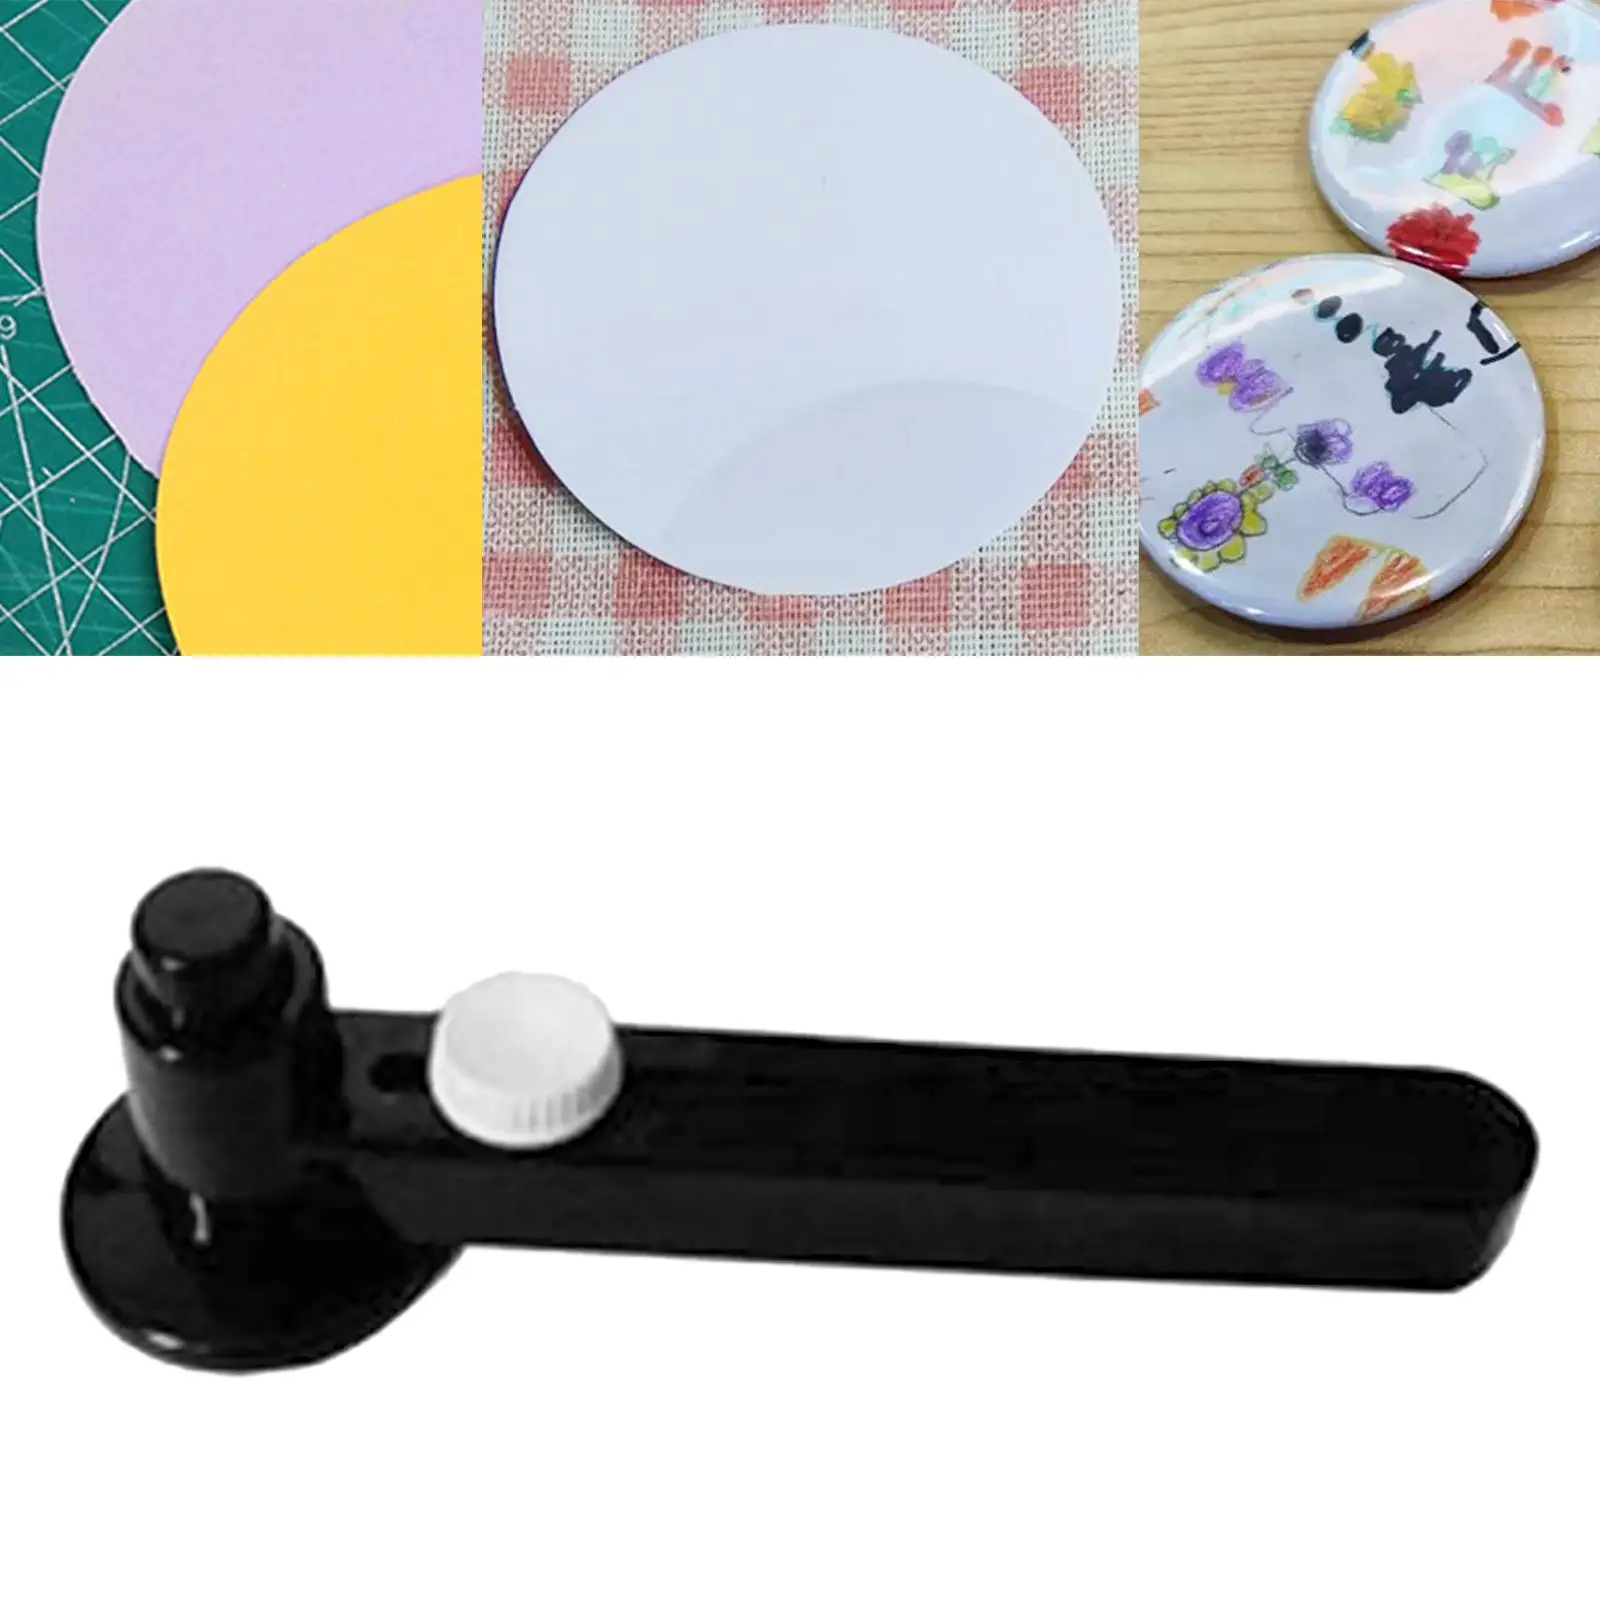 Circular Badge Cutter Button/Card/badge/Photo Maker Craft Portable Manual Round Cutter for Paper Crafts DIY Sewing Cutting Badge